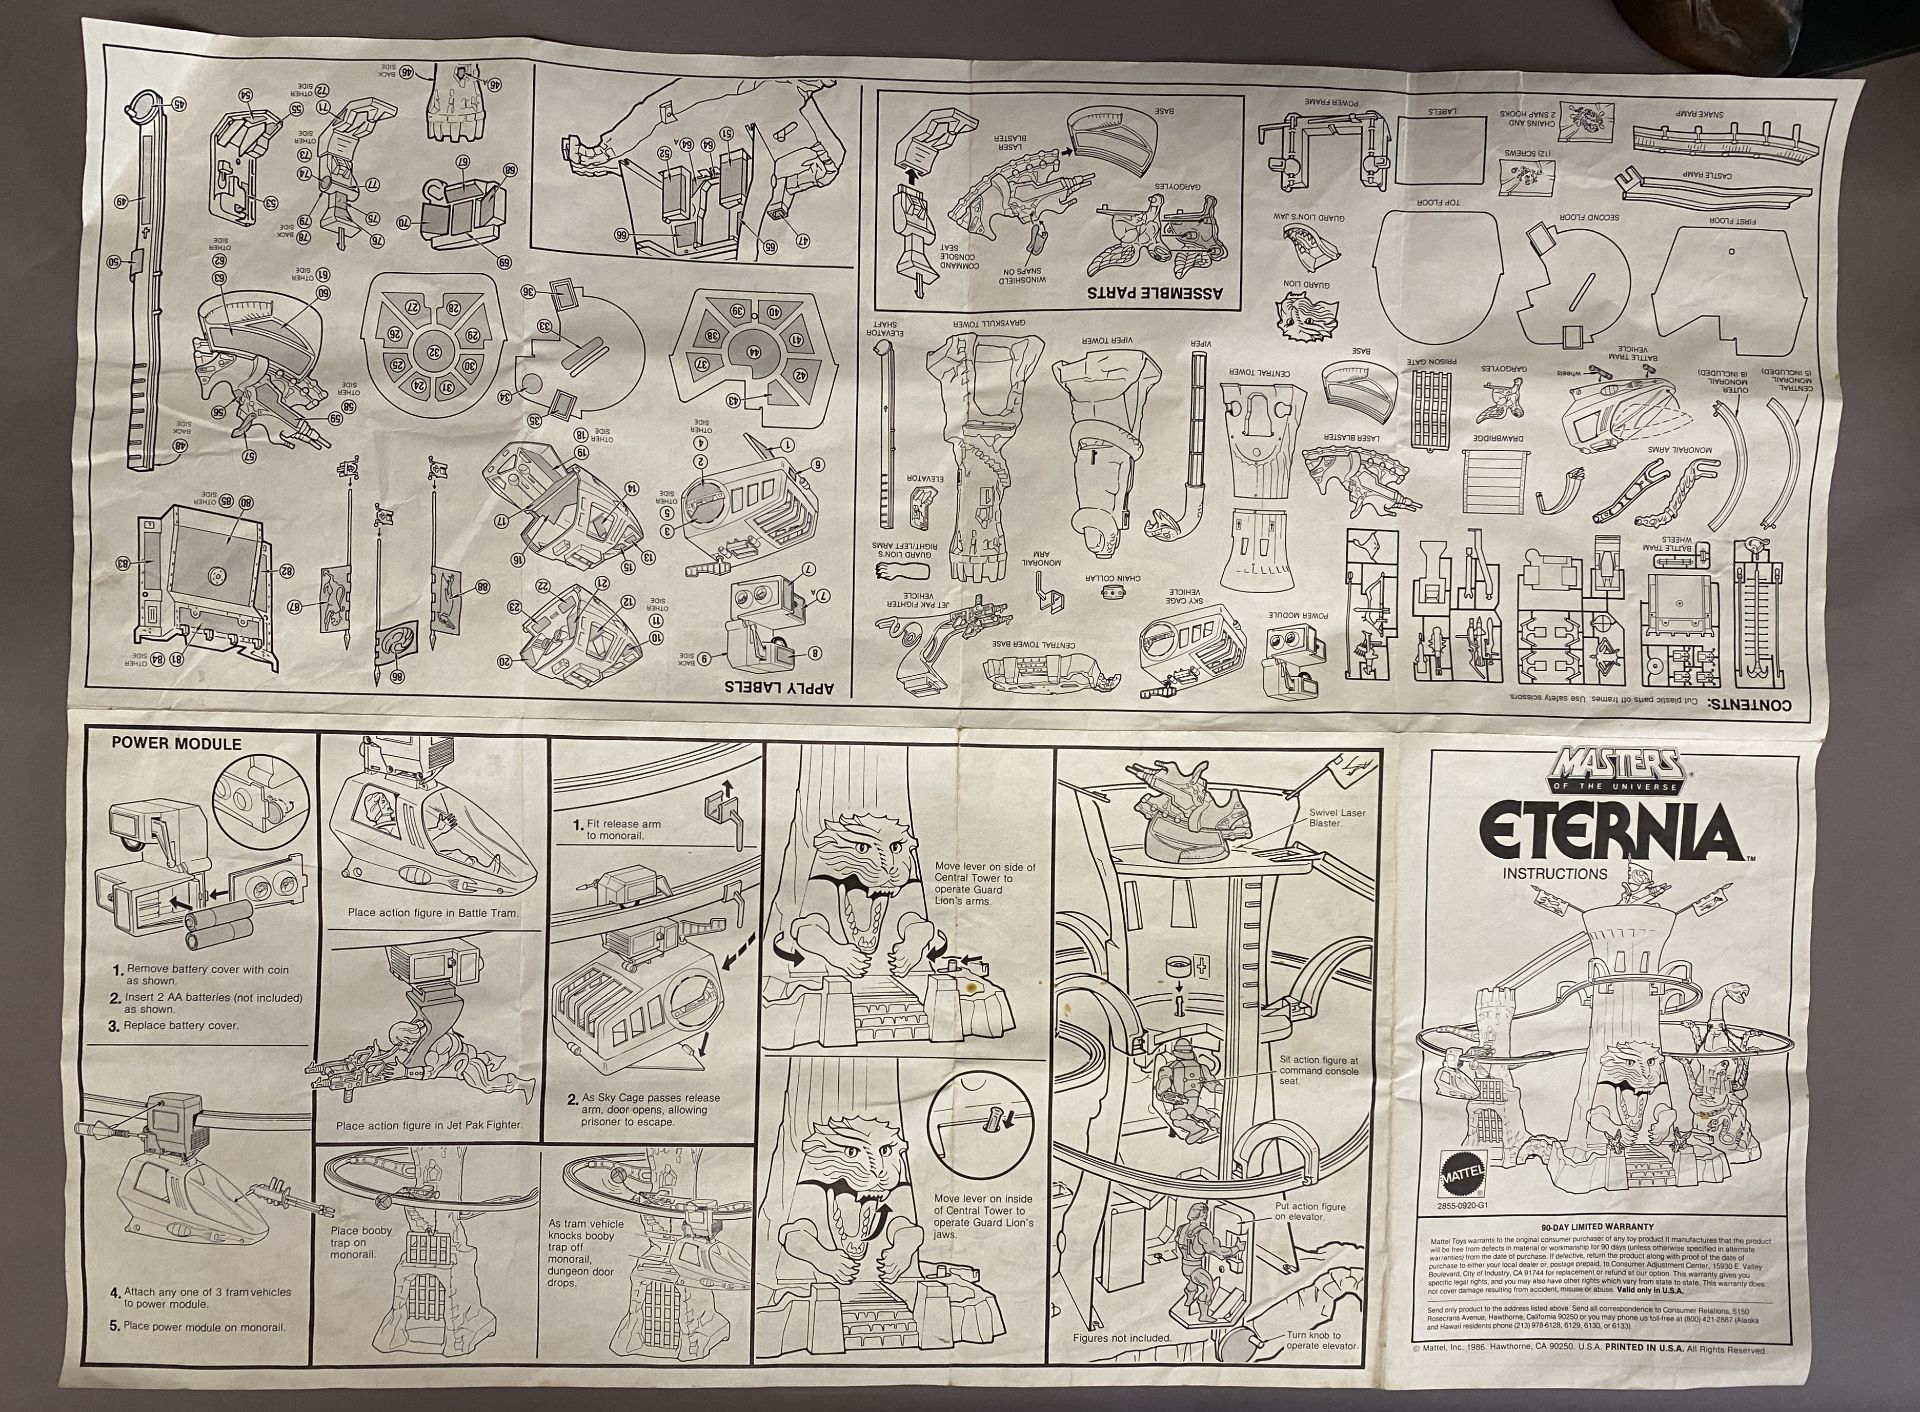 ETERNIA - Vintage Masters of the Universe Playset and Original Box (MOTU) - Appears to be complete - Image 109 of 125